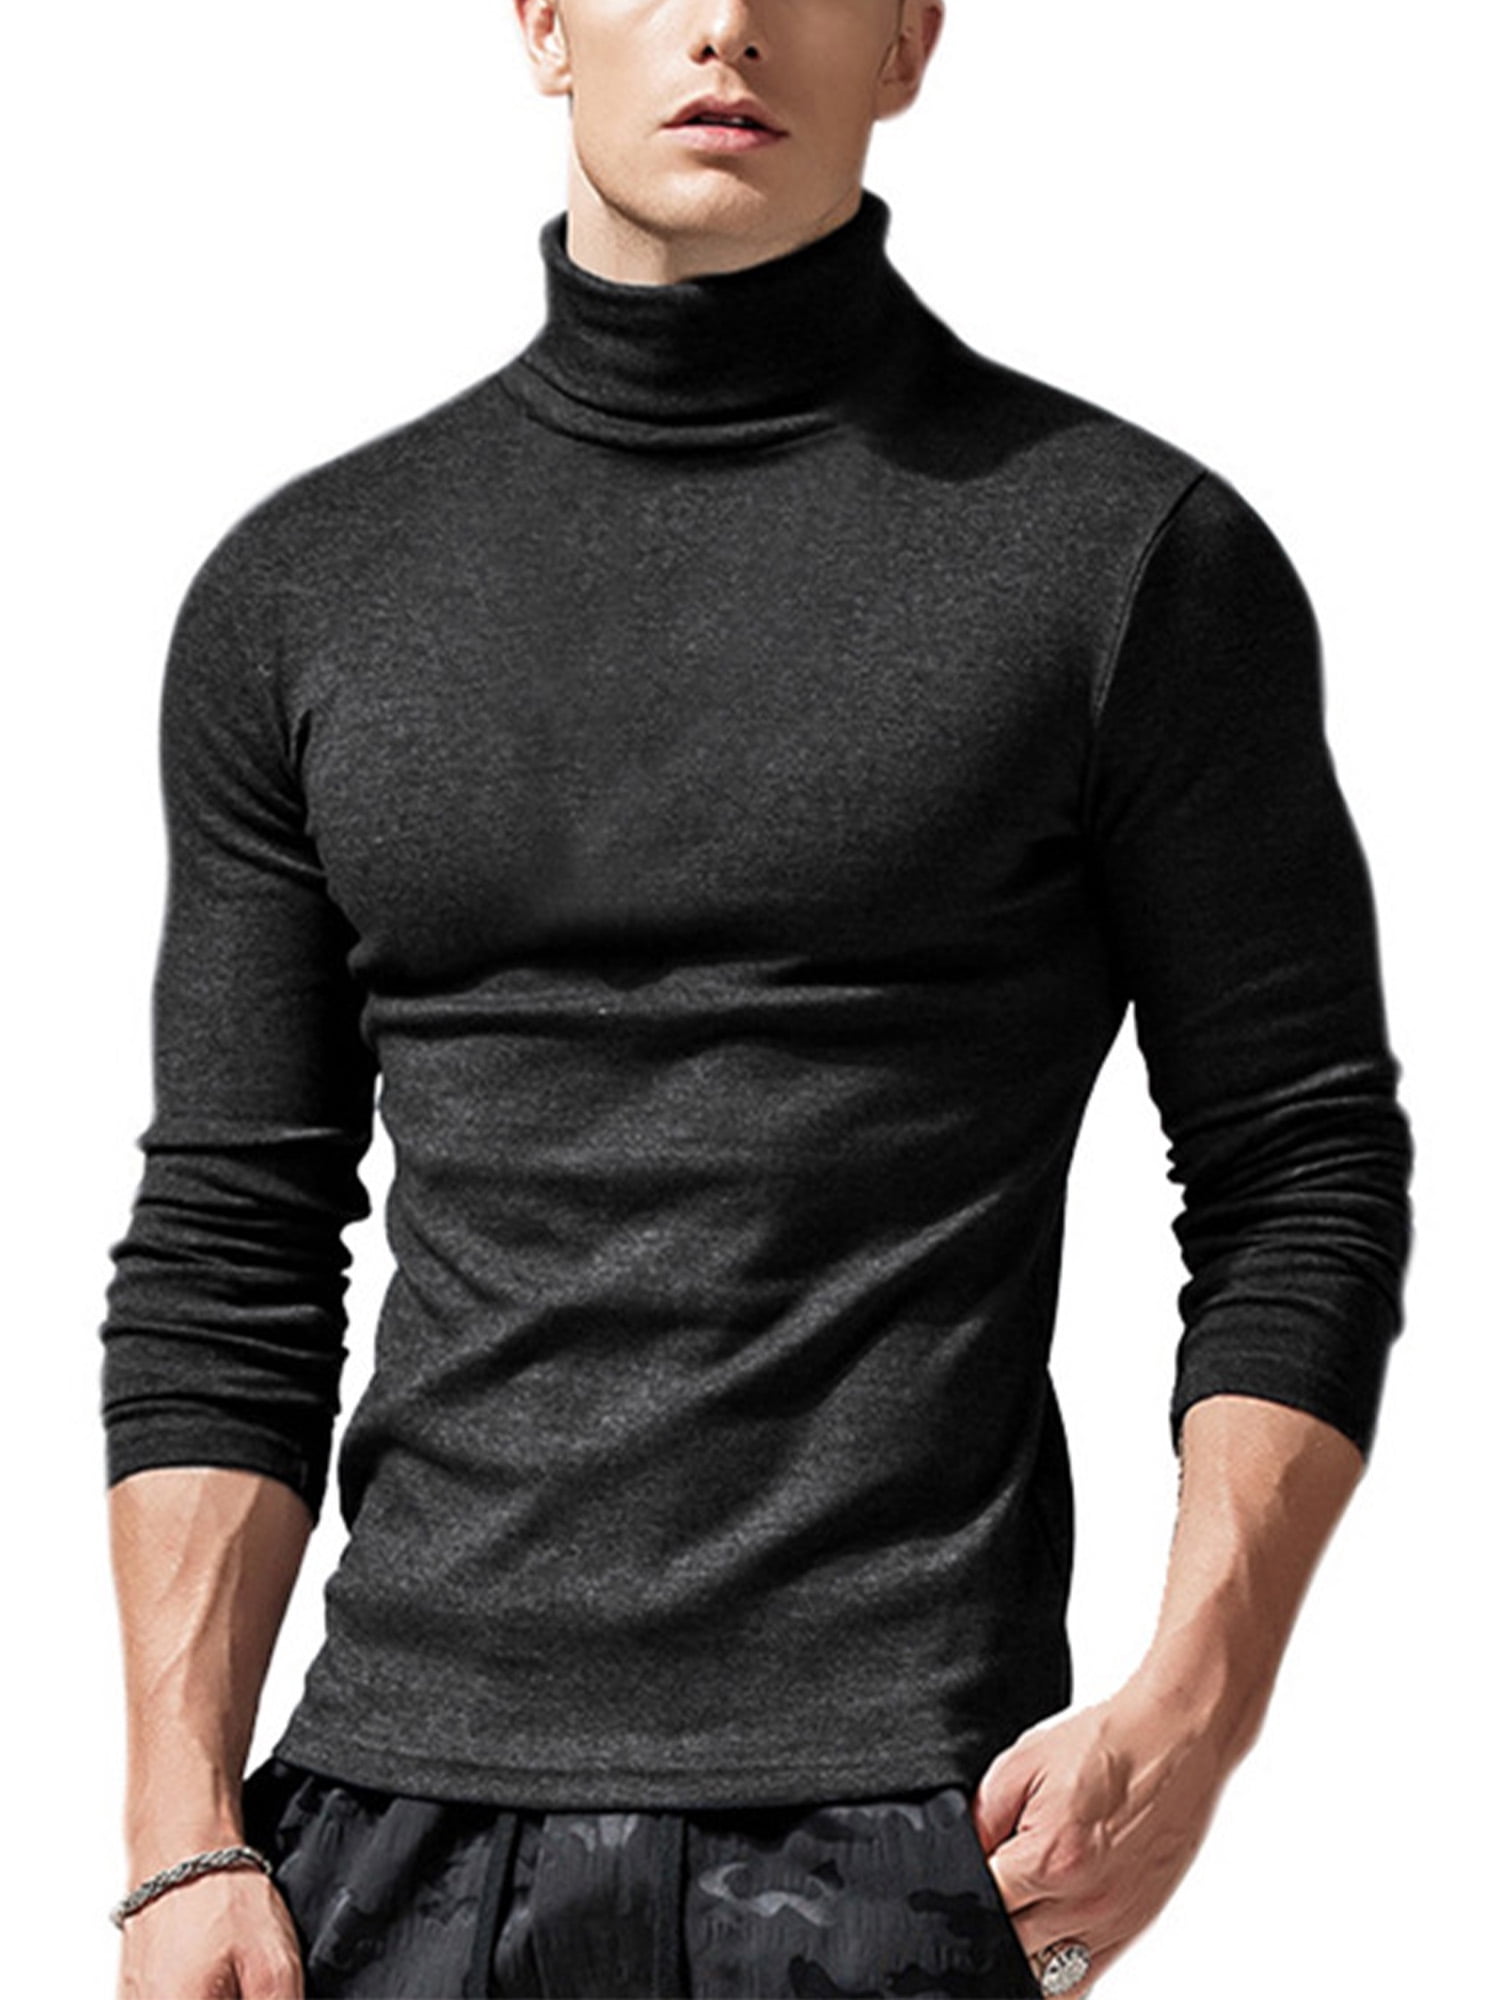 ZZpioneer Mens Turtleneck Short Sleeve Pullover Lightweight T-Shirt Casual Slim Fit Tops Blouse Shirts